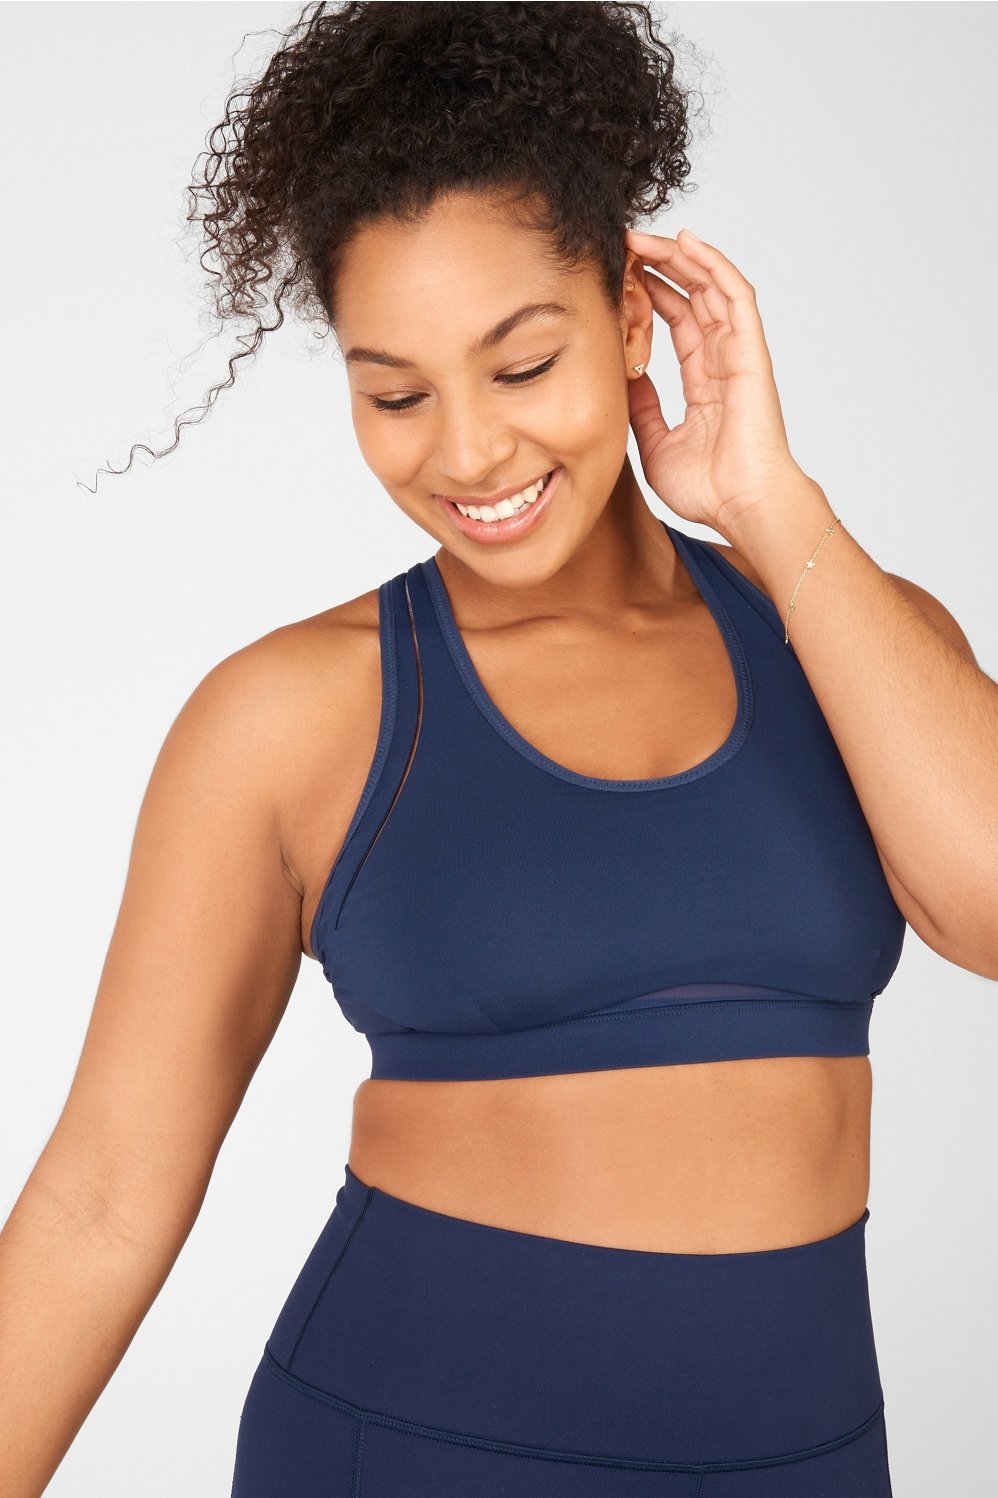 Fabletics Belle High Impact Sports Bra Purple Small - $29 - From Kelly